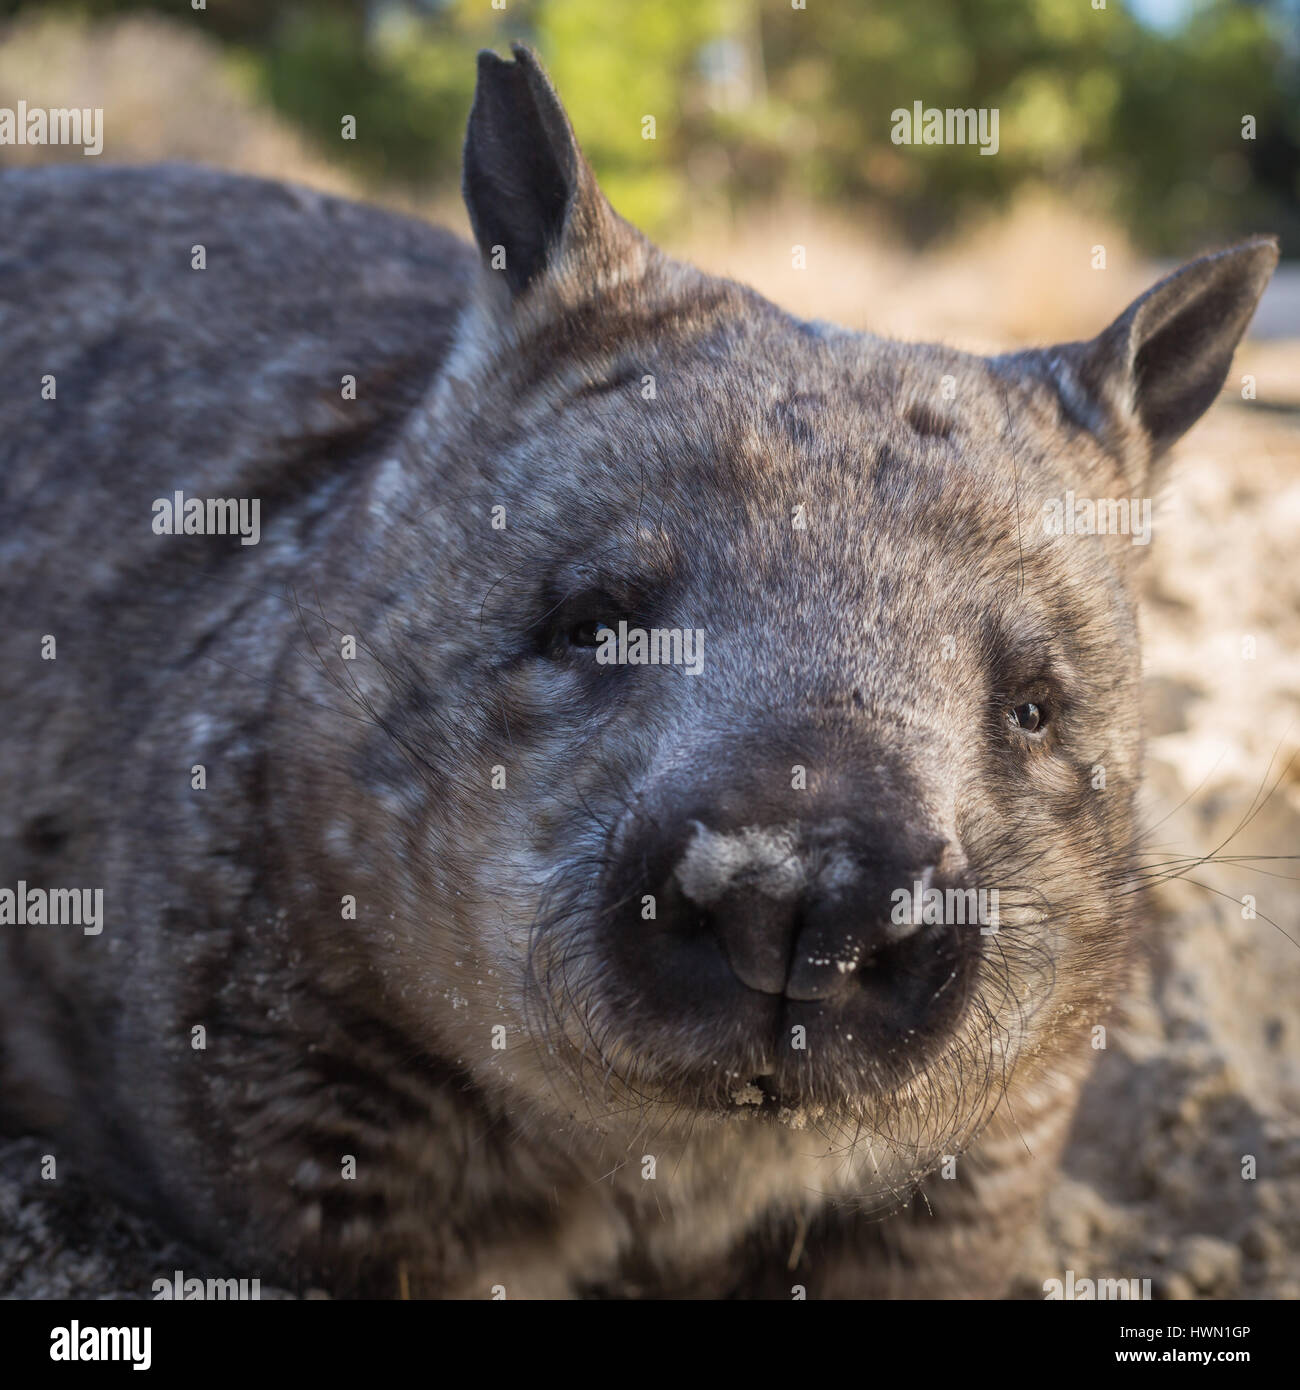 Southern Hairy-nosed wombat Stock Photo